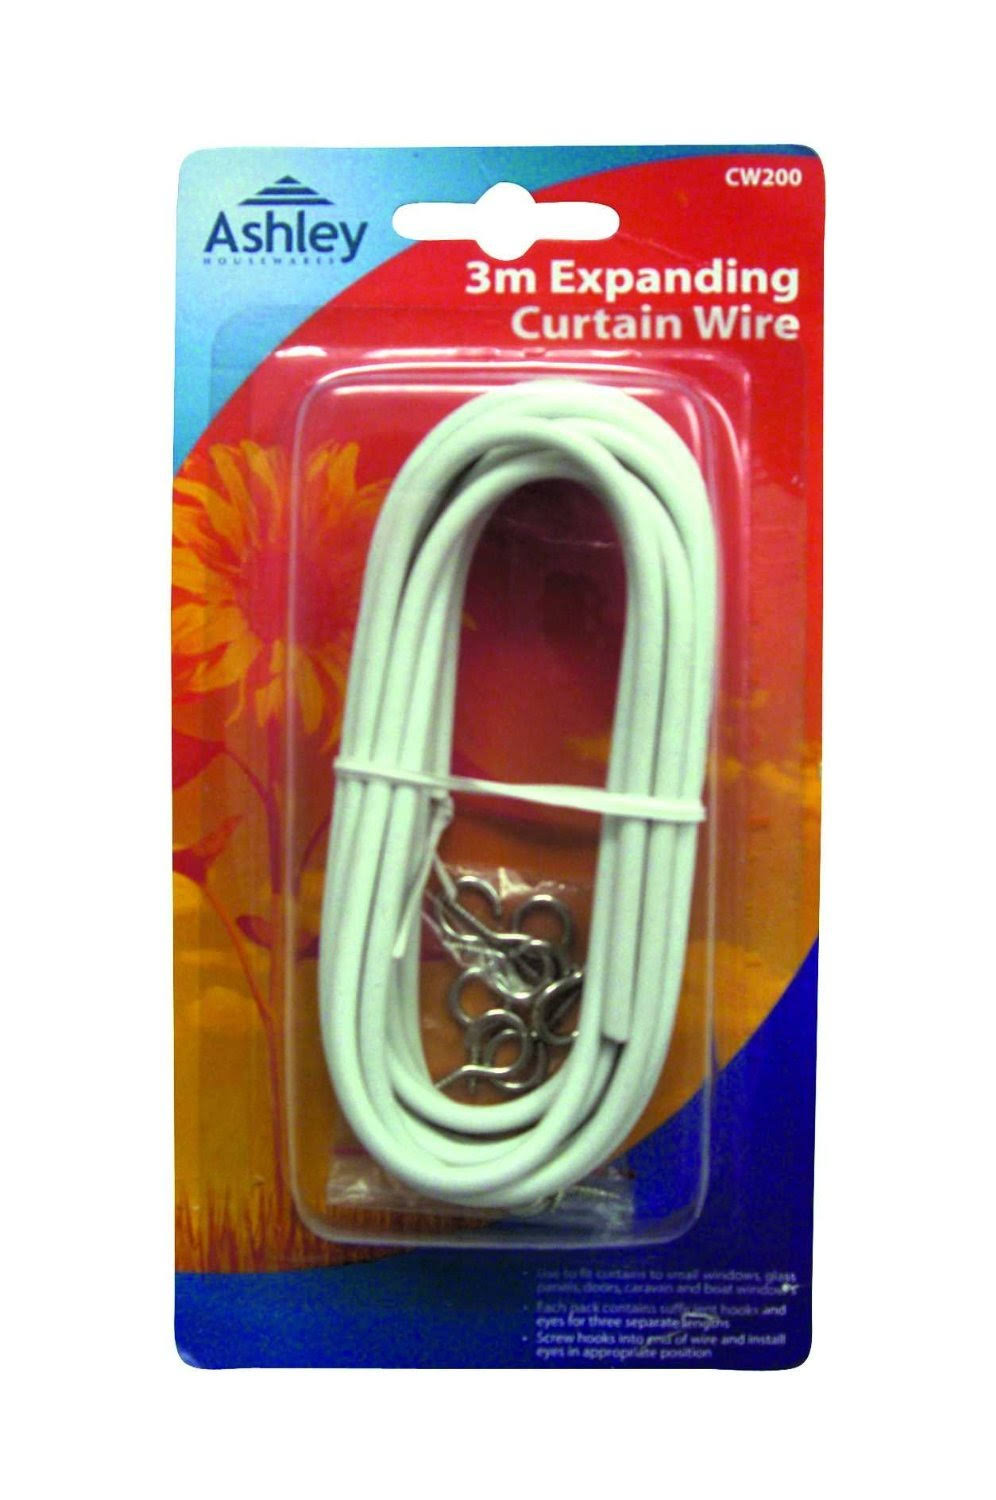 3M Expanding Curtain Wire